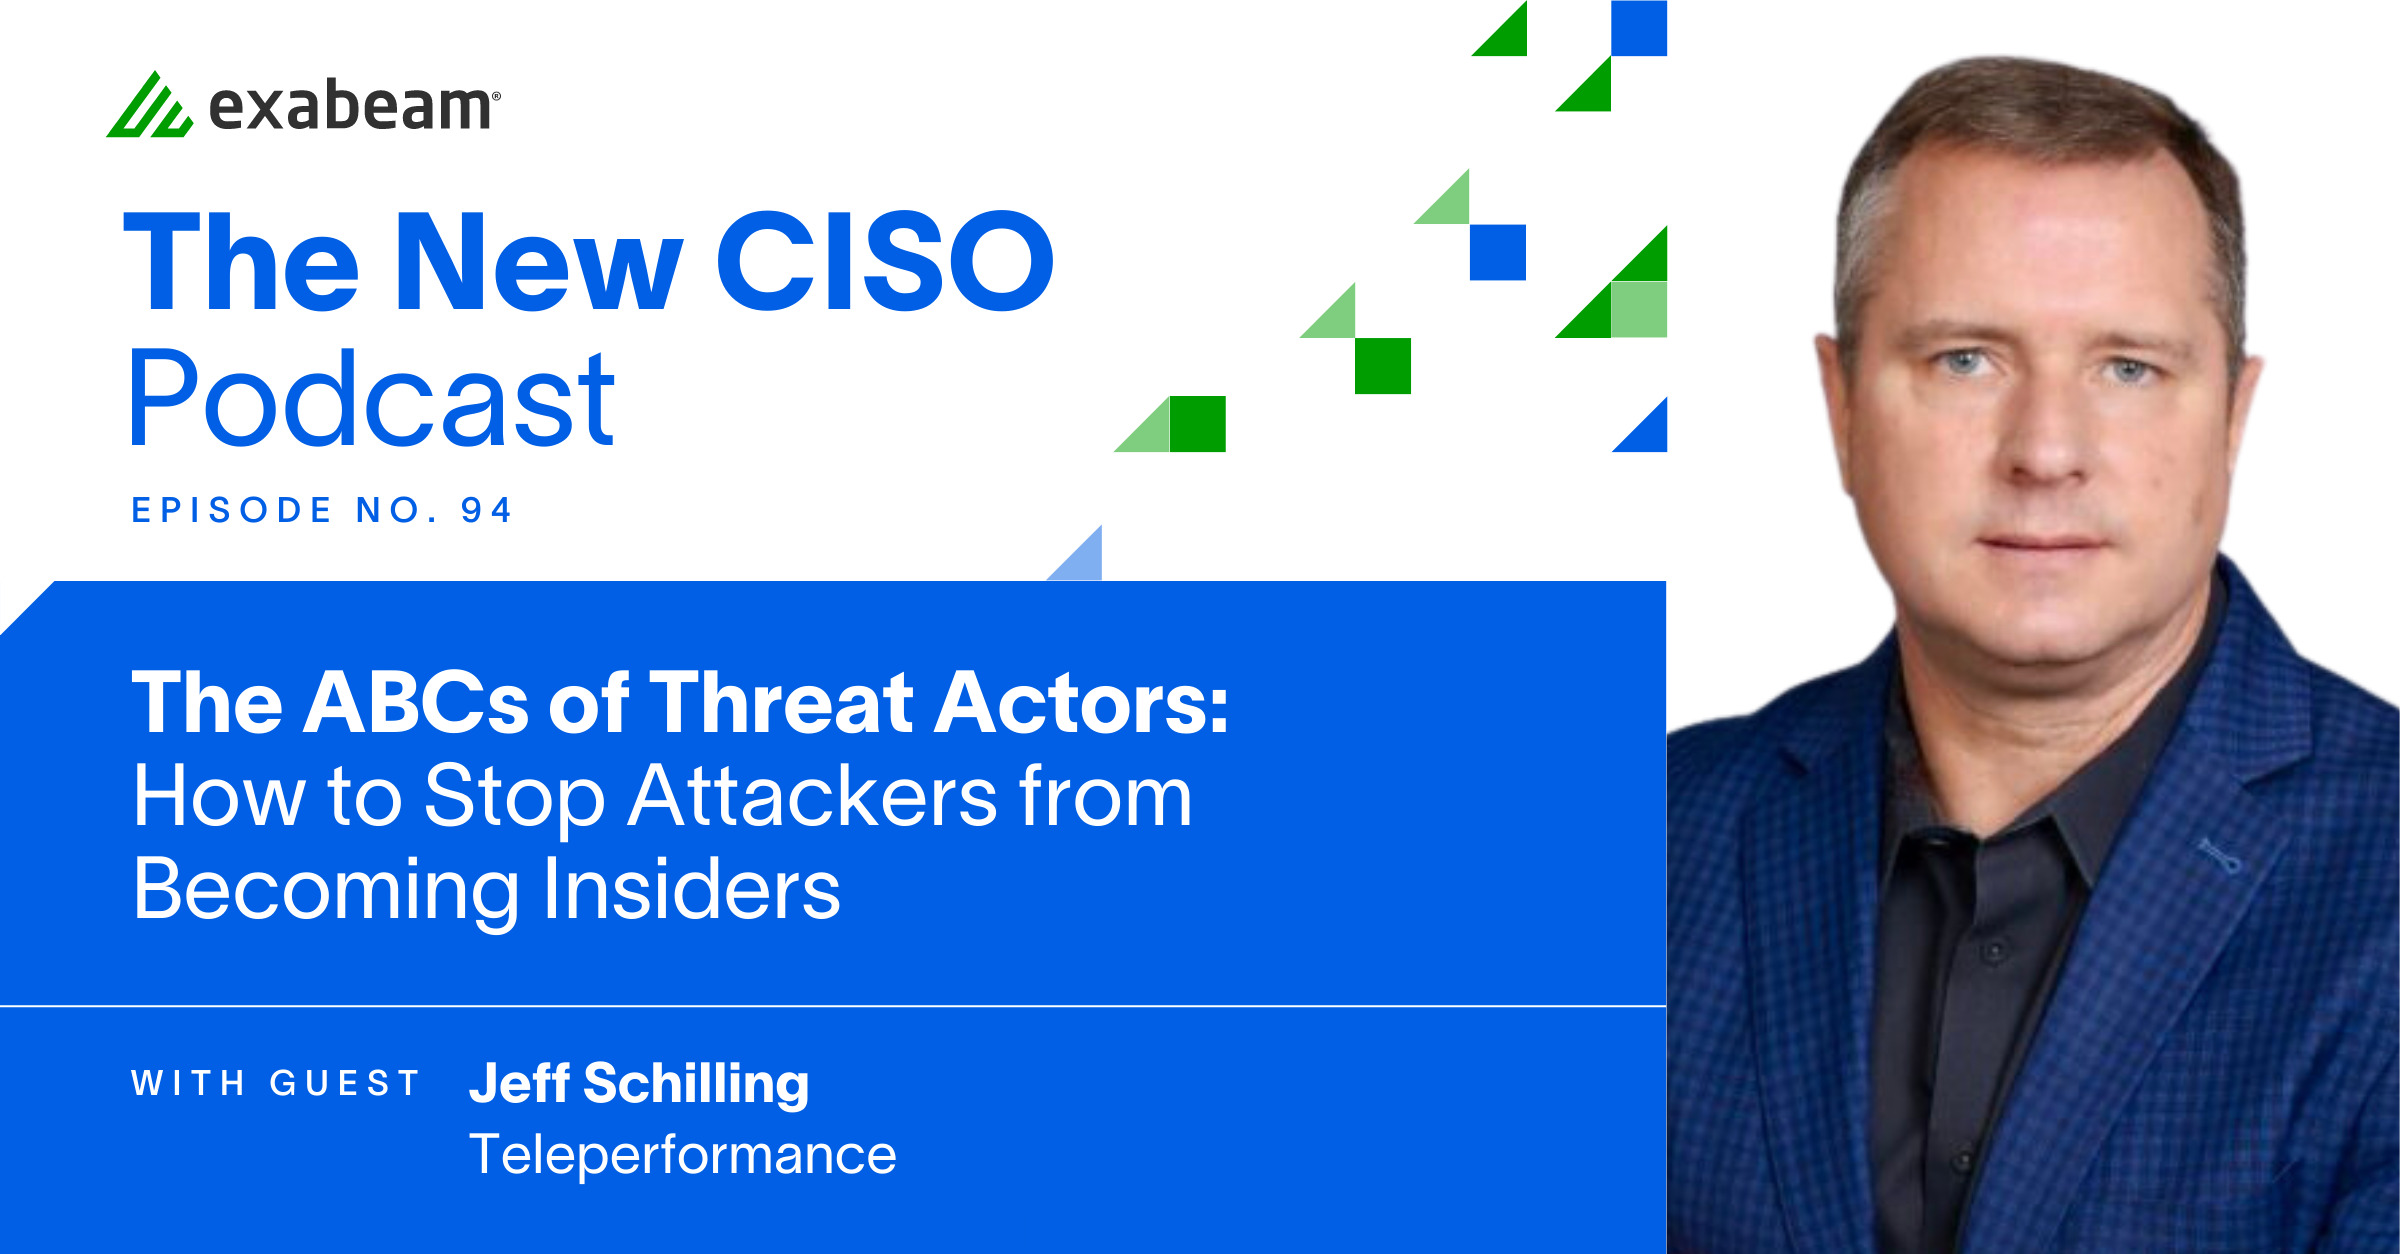 The New CISO Podcast Episode 94: The ABCs of Threat Actors: How to Stop Attackers From Becoming Insiders